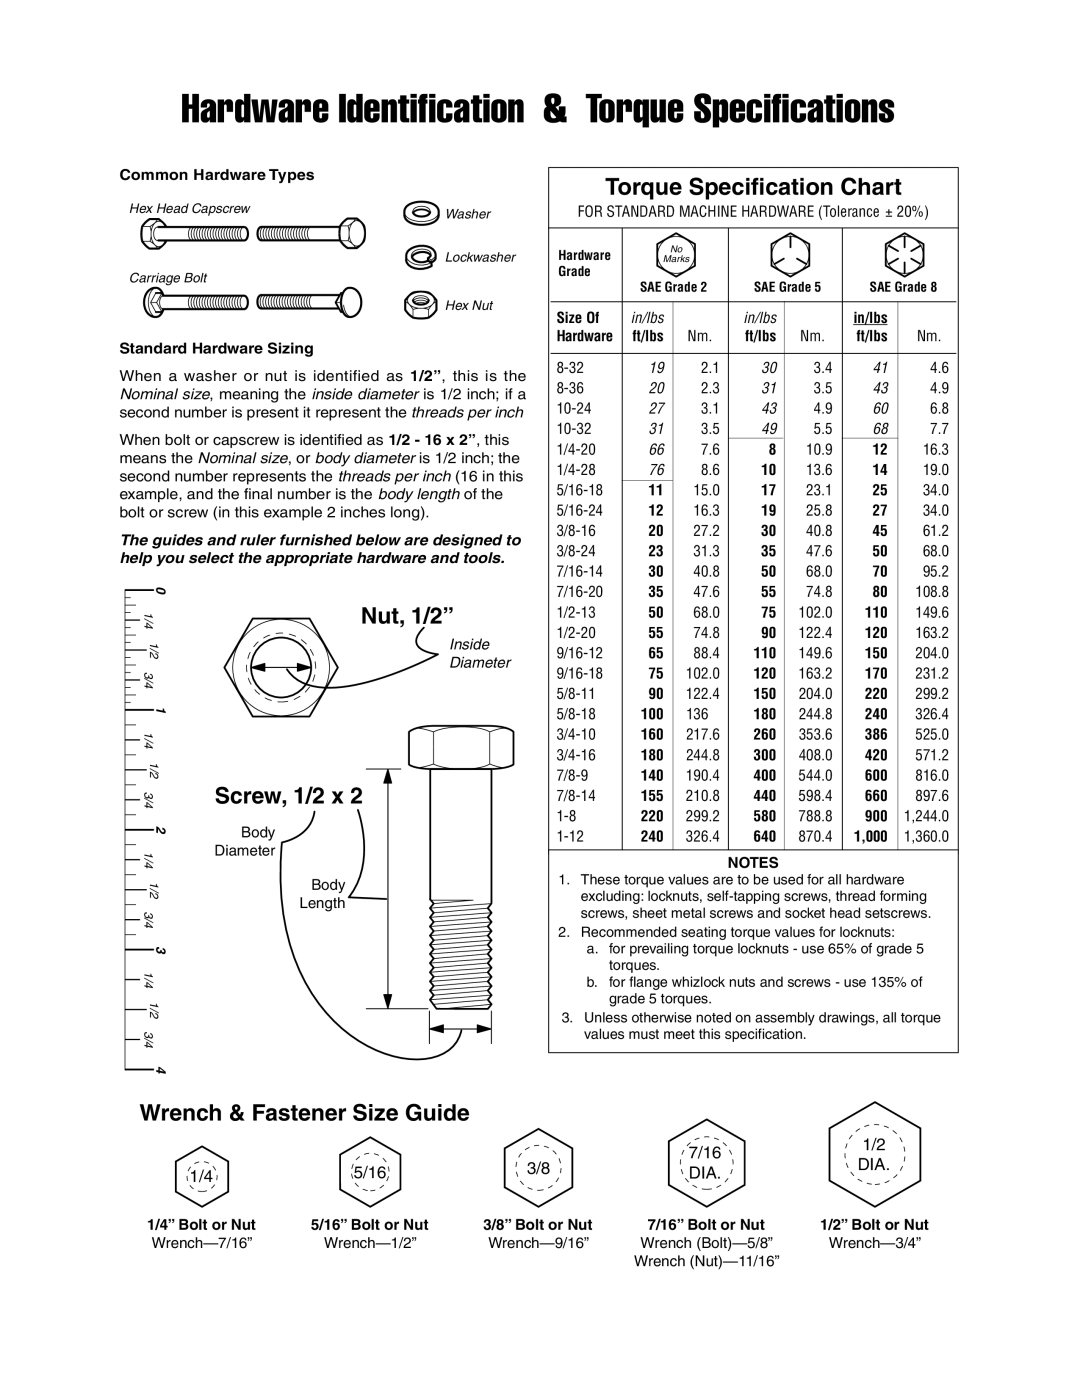 Snapper 4574 Wrench & Fastener Size Guide, Hardware Identification & Torque Specifications, Torque Specification Chart 